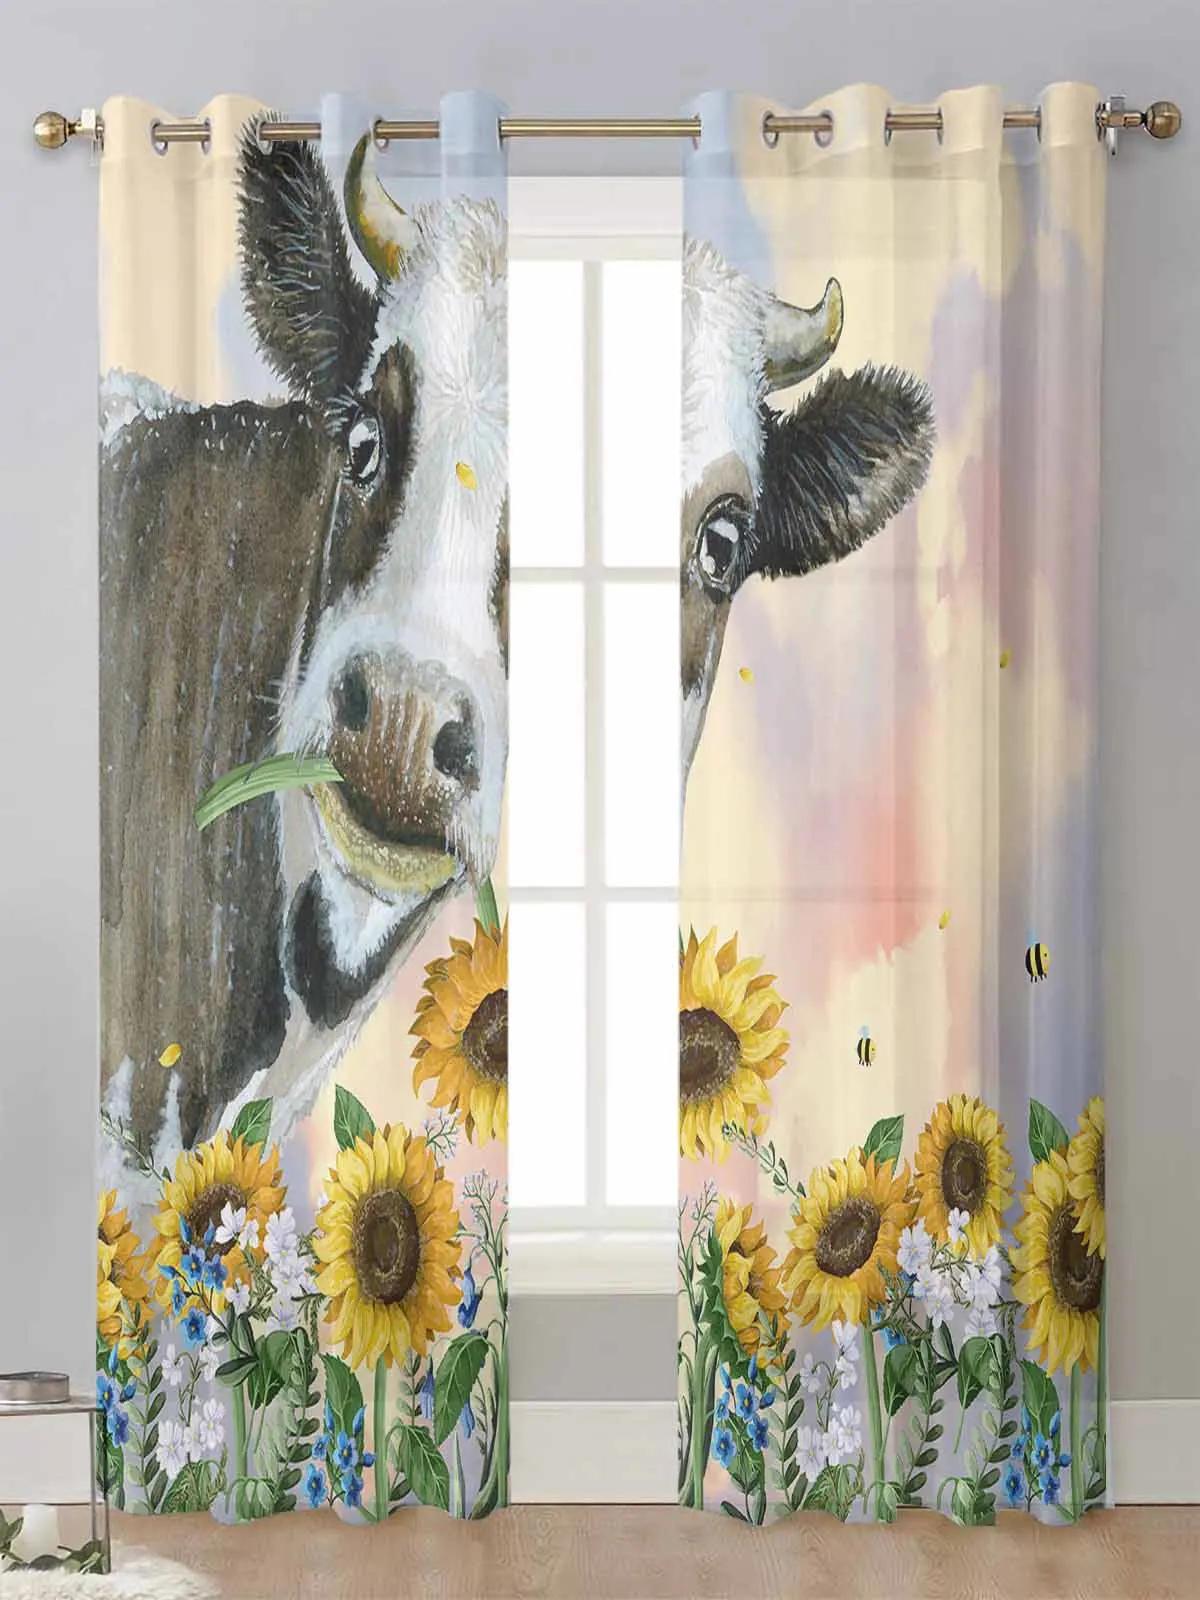 

Country Style Sunflower Cow Sheer Curtains For Living Room Window Transparent Voile Tulle Curtain Cortinas Drapes Home Decor